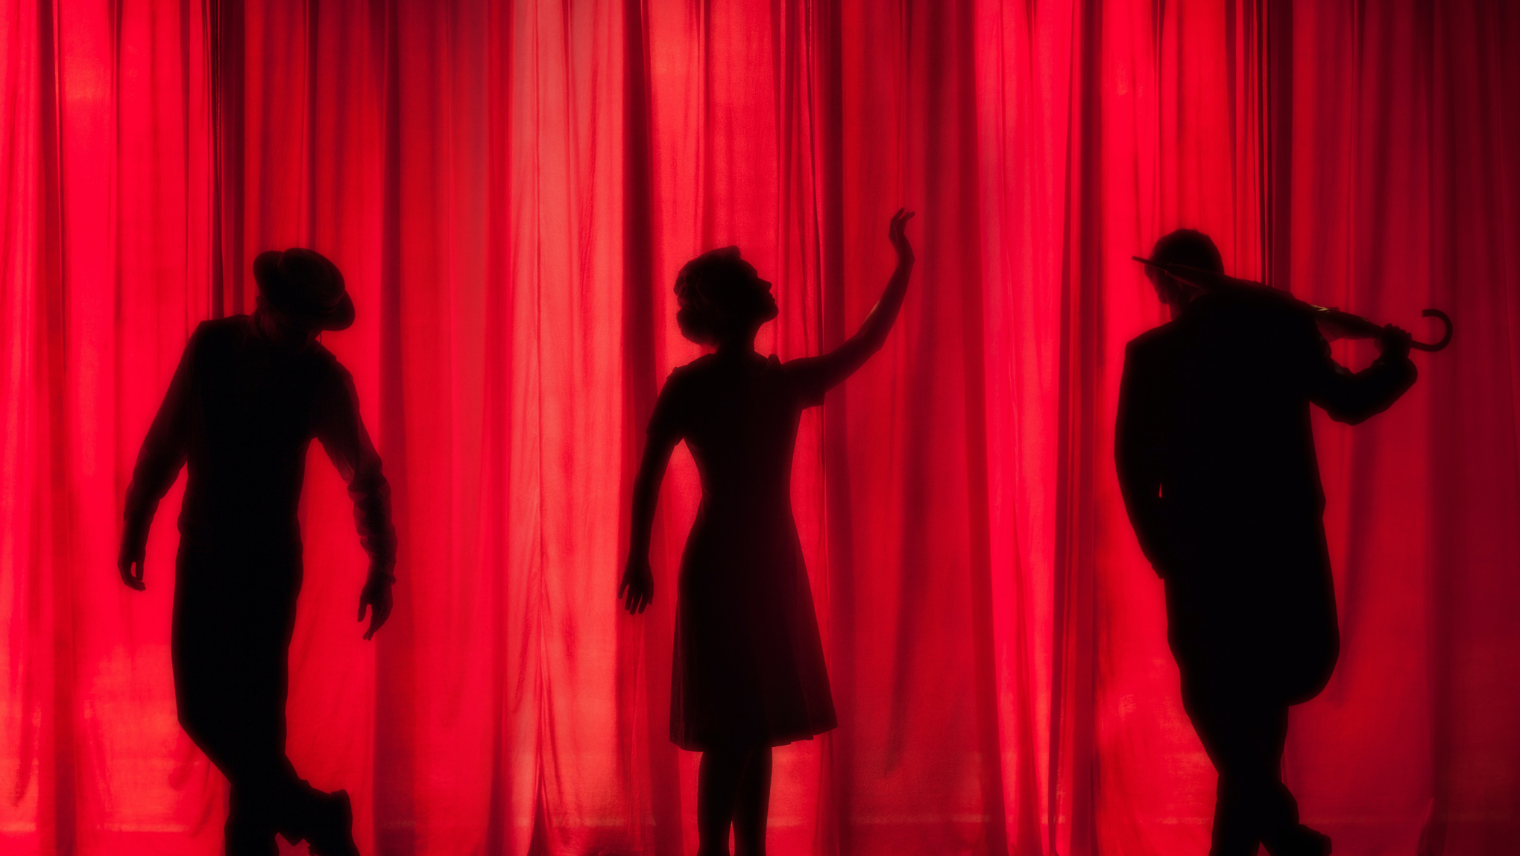 Image of 3 people's shadows behind a curtain on a theatre stage